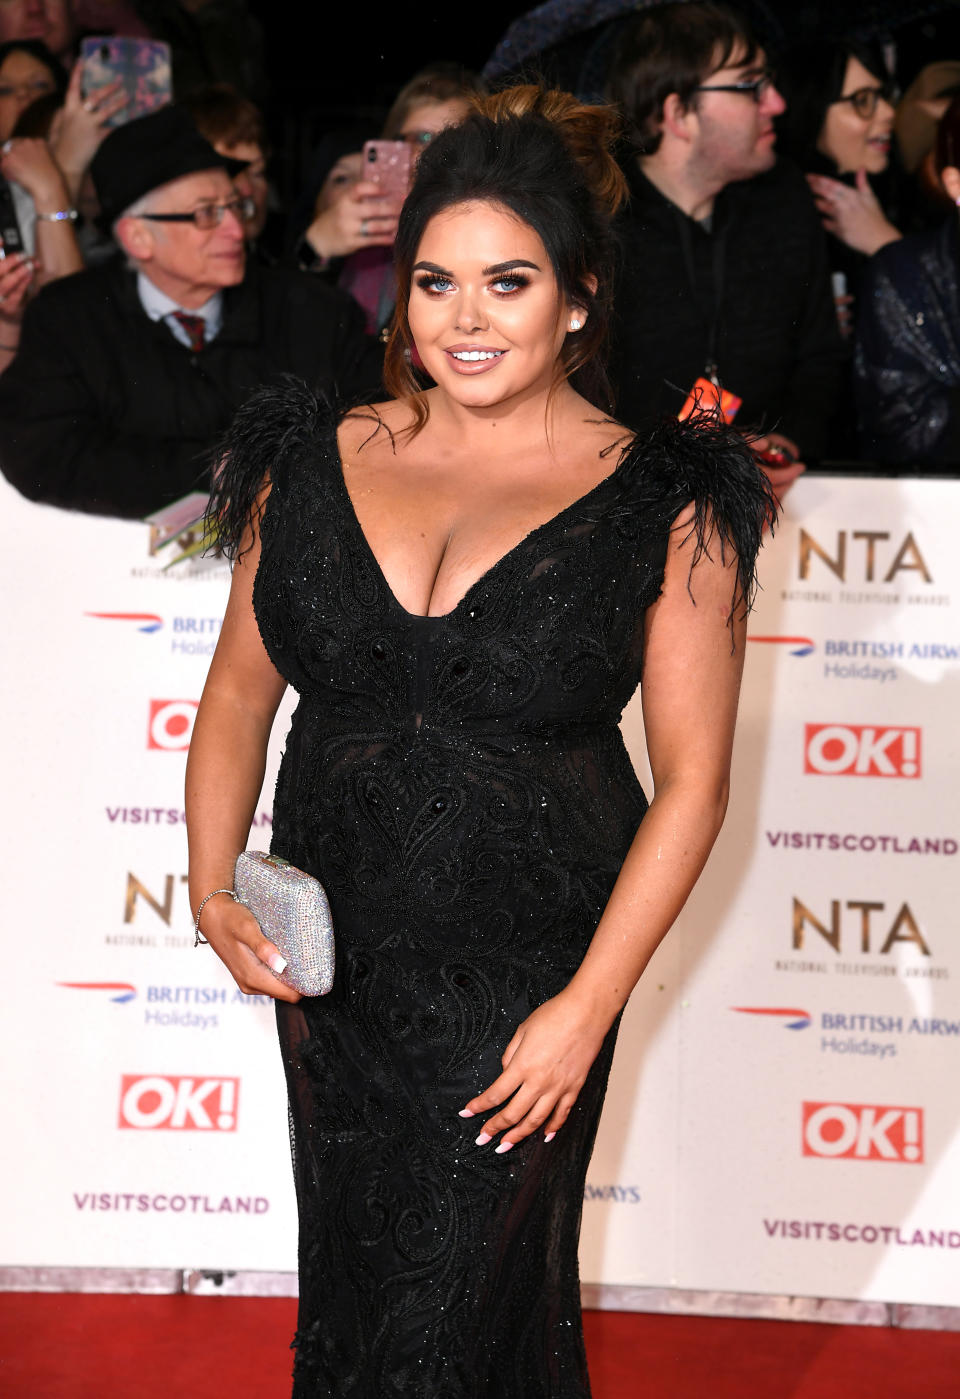 Scarlett Moffatt attending the National Television Awards 2019 held at the O2 Arena, London. Photo credit should read: Doug Peters/EMPICS